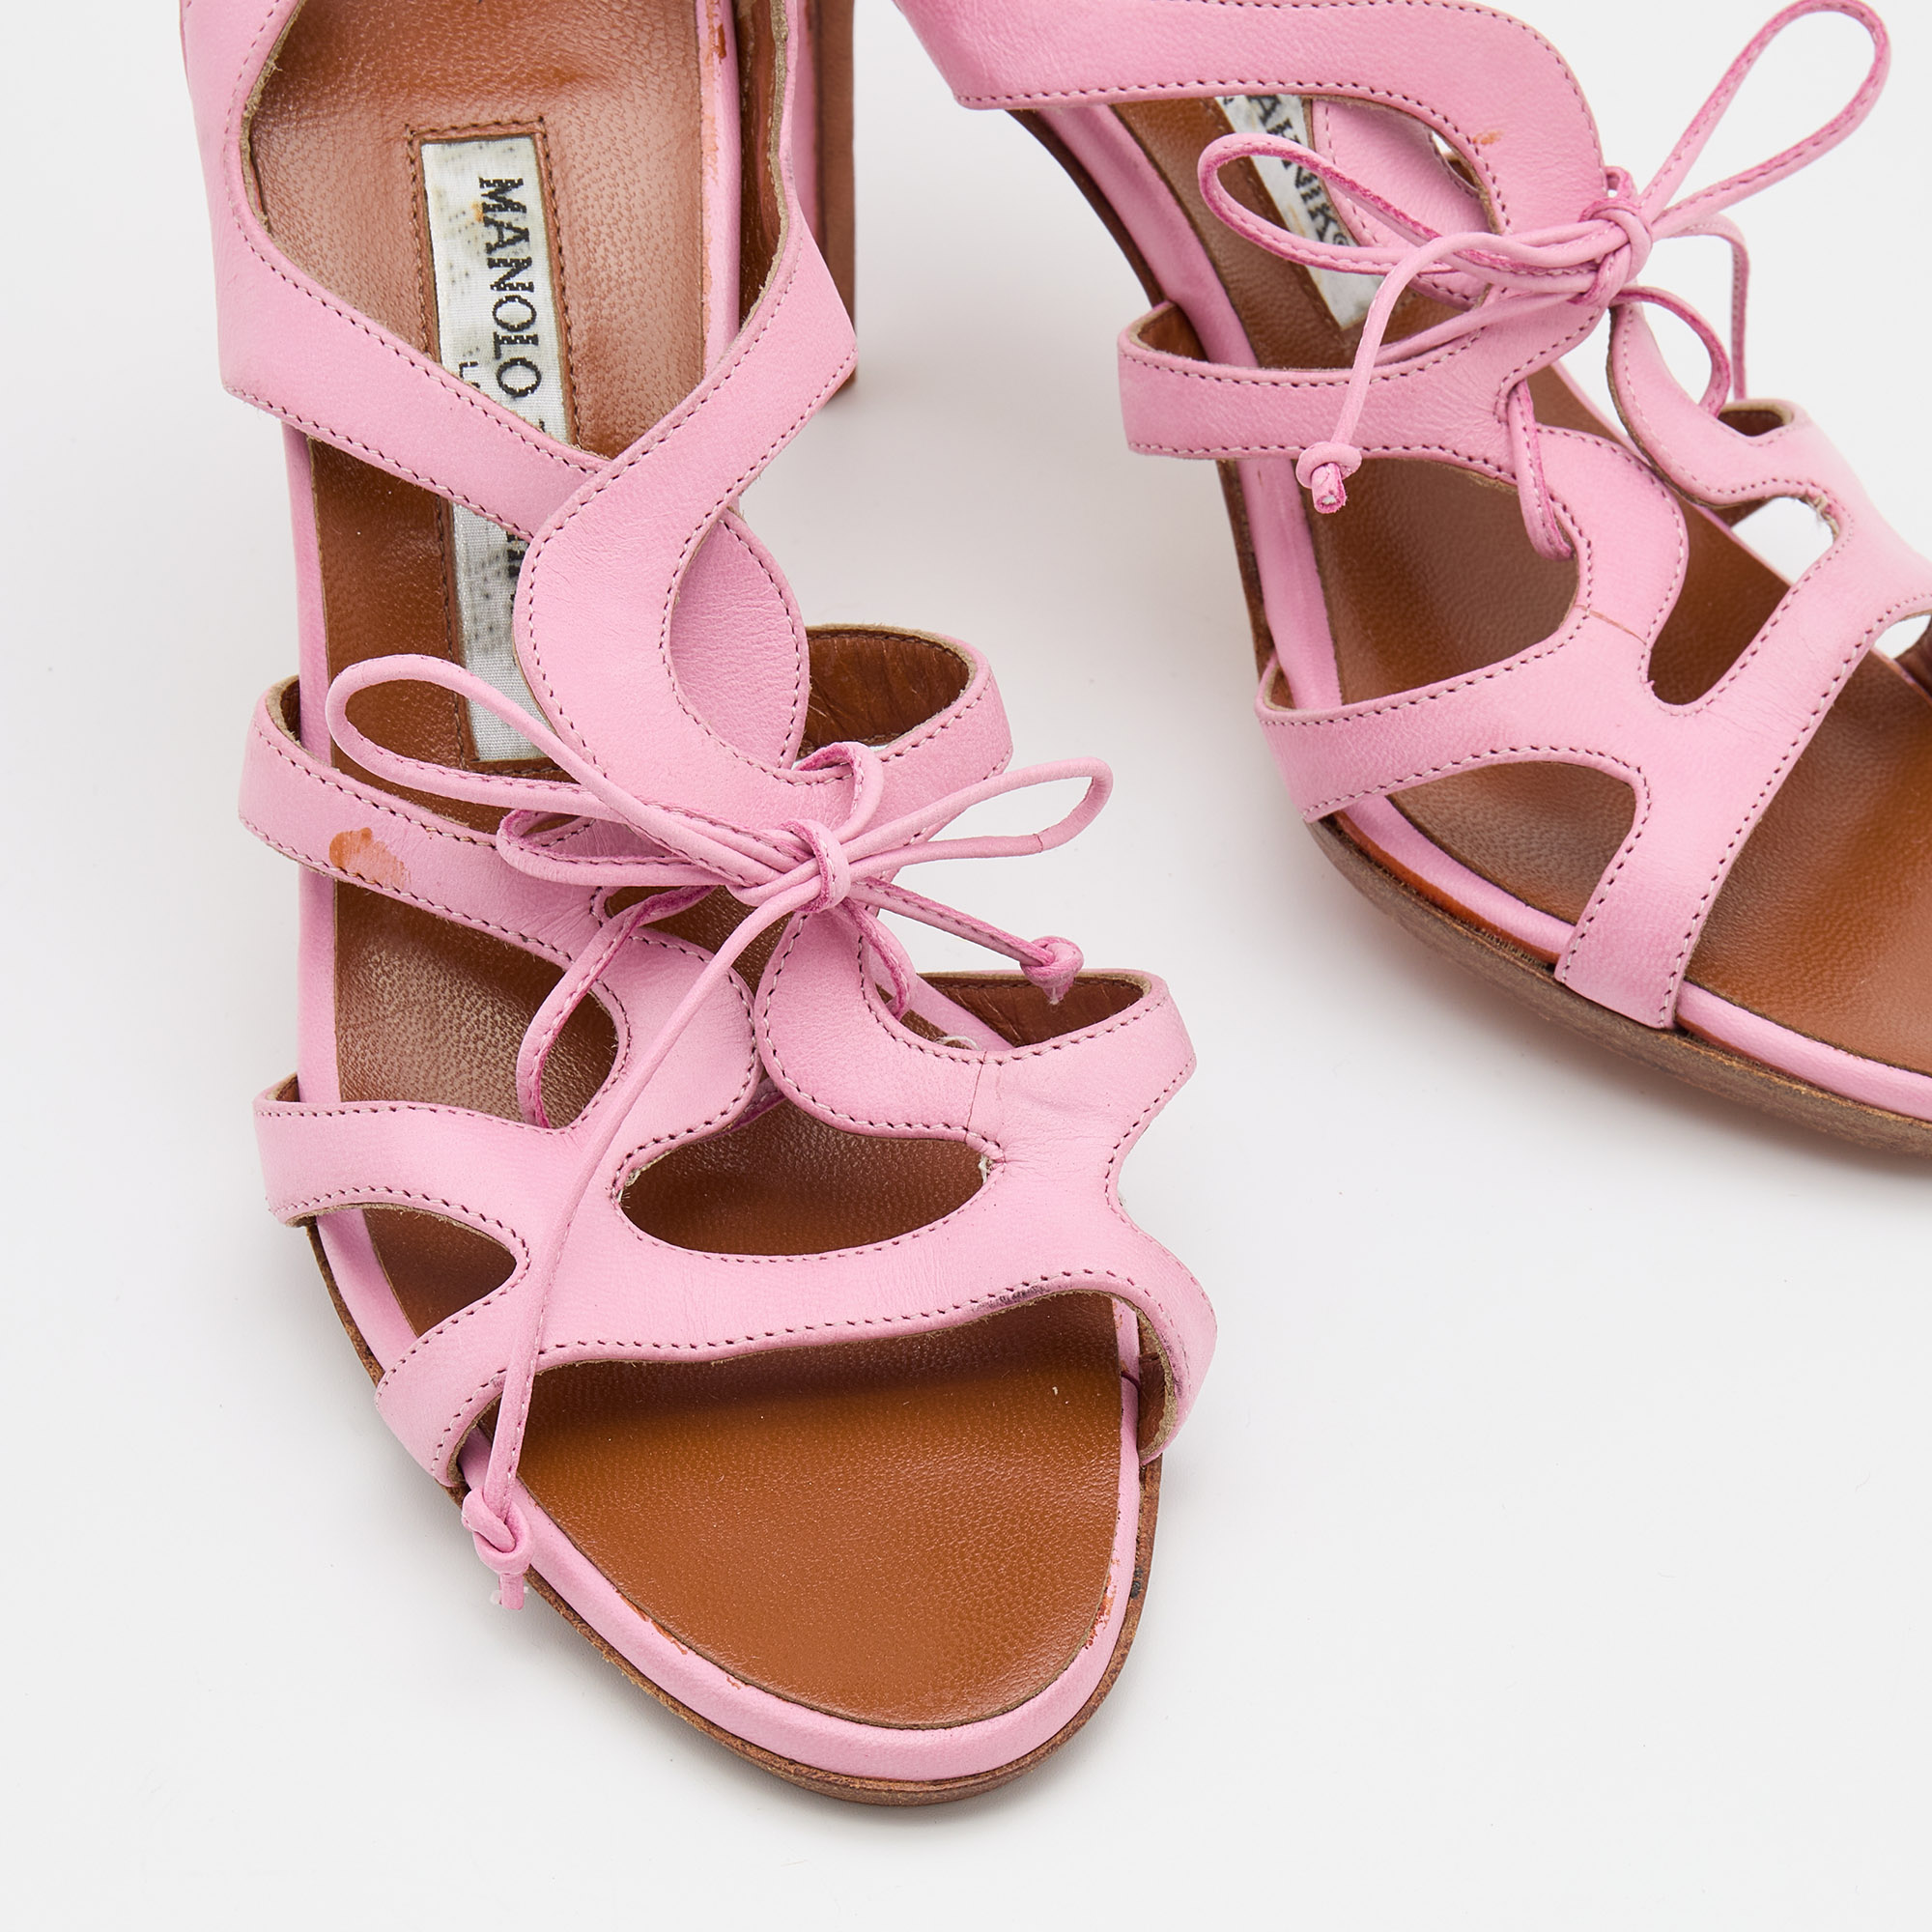 Manolo Blahnik Pink Leather Strappy Ankle Tie Sandals Size 36.5